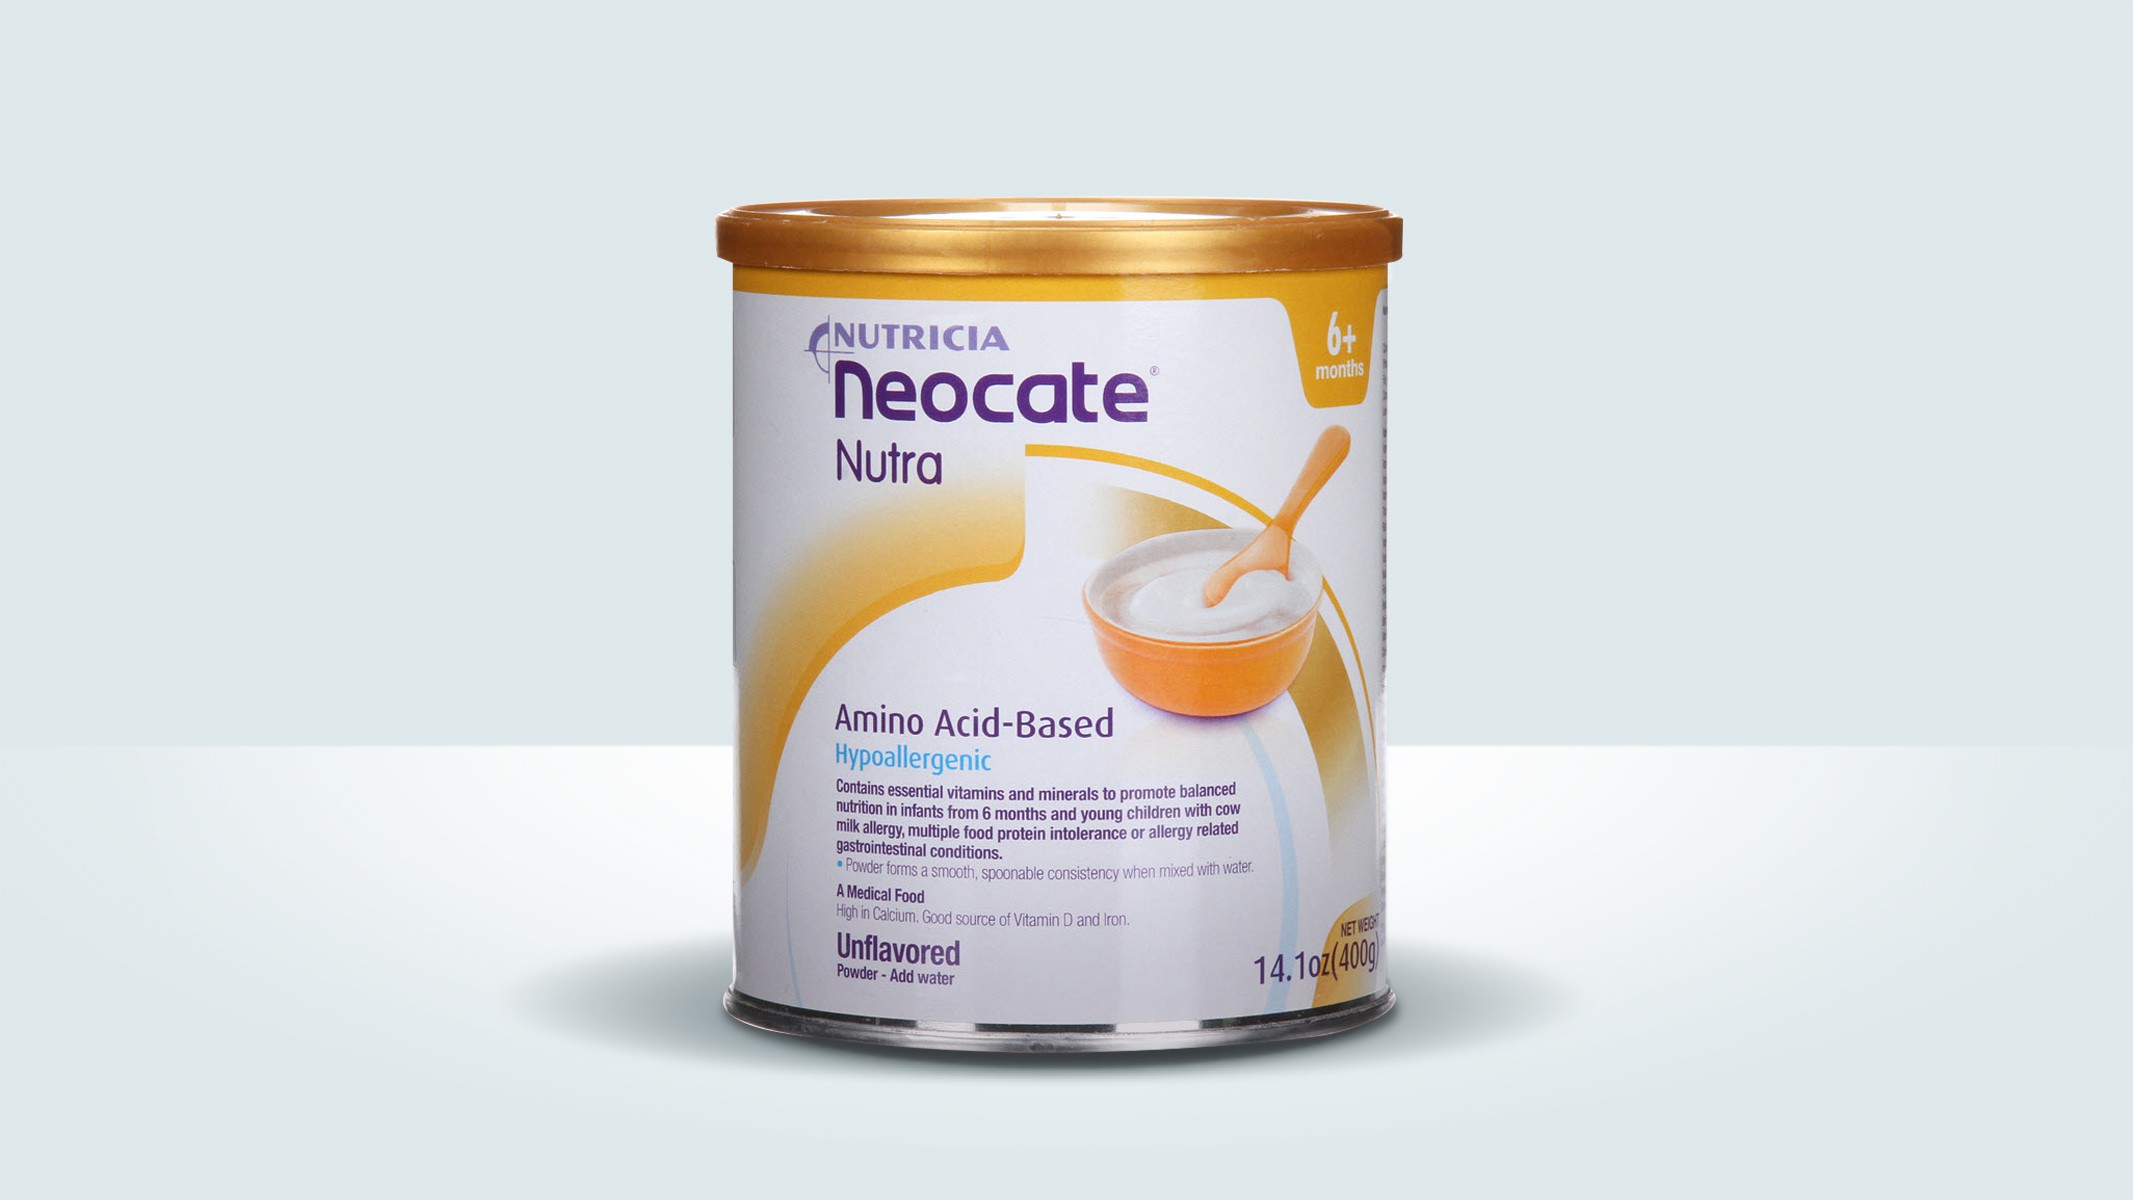 Neocate Nutra 360° of the can